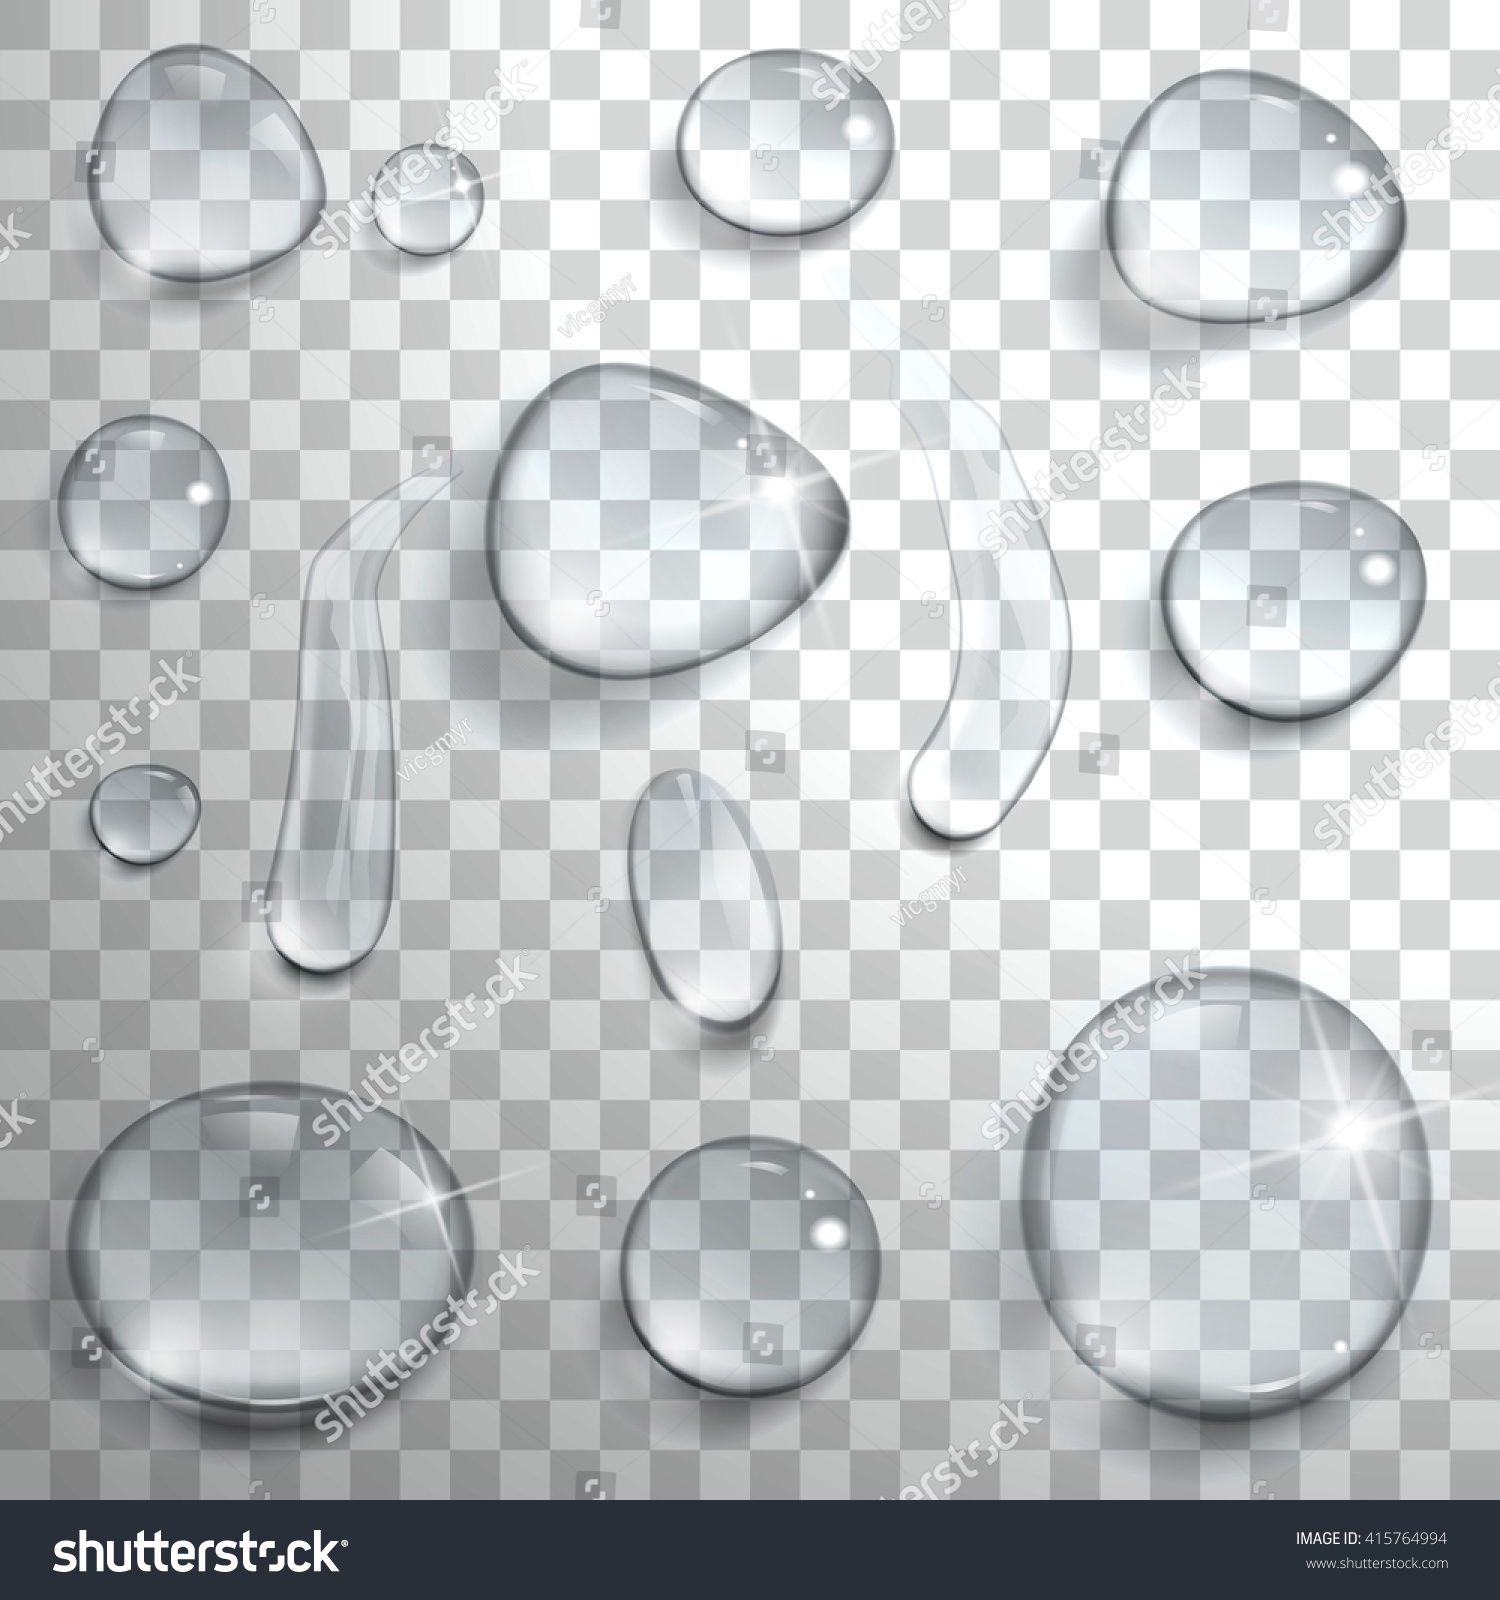 set of water drops on a transparent background #415764994